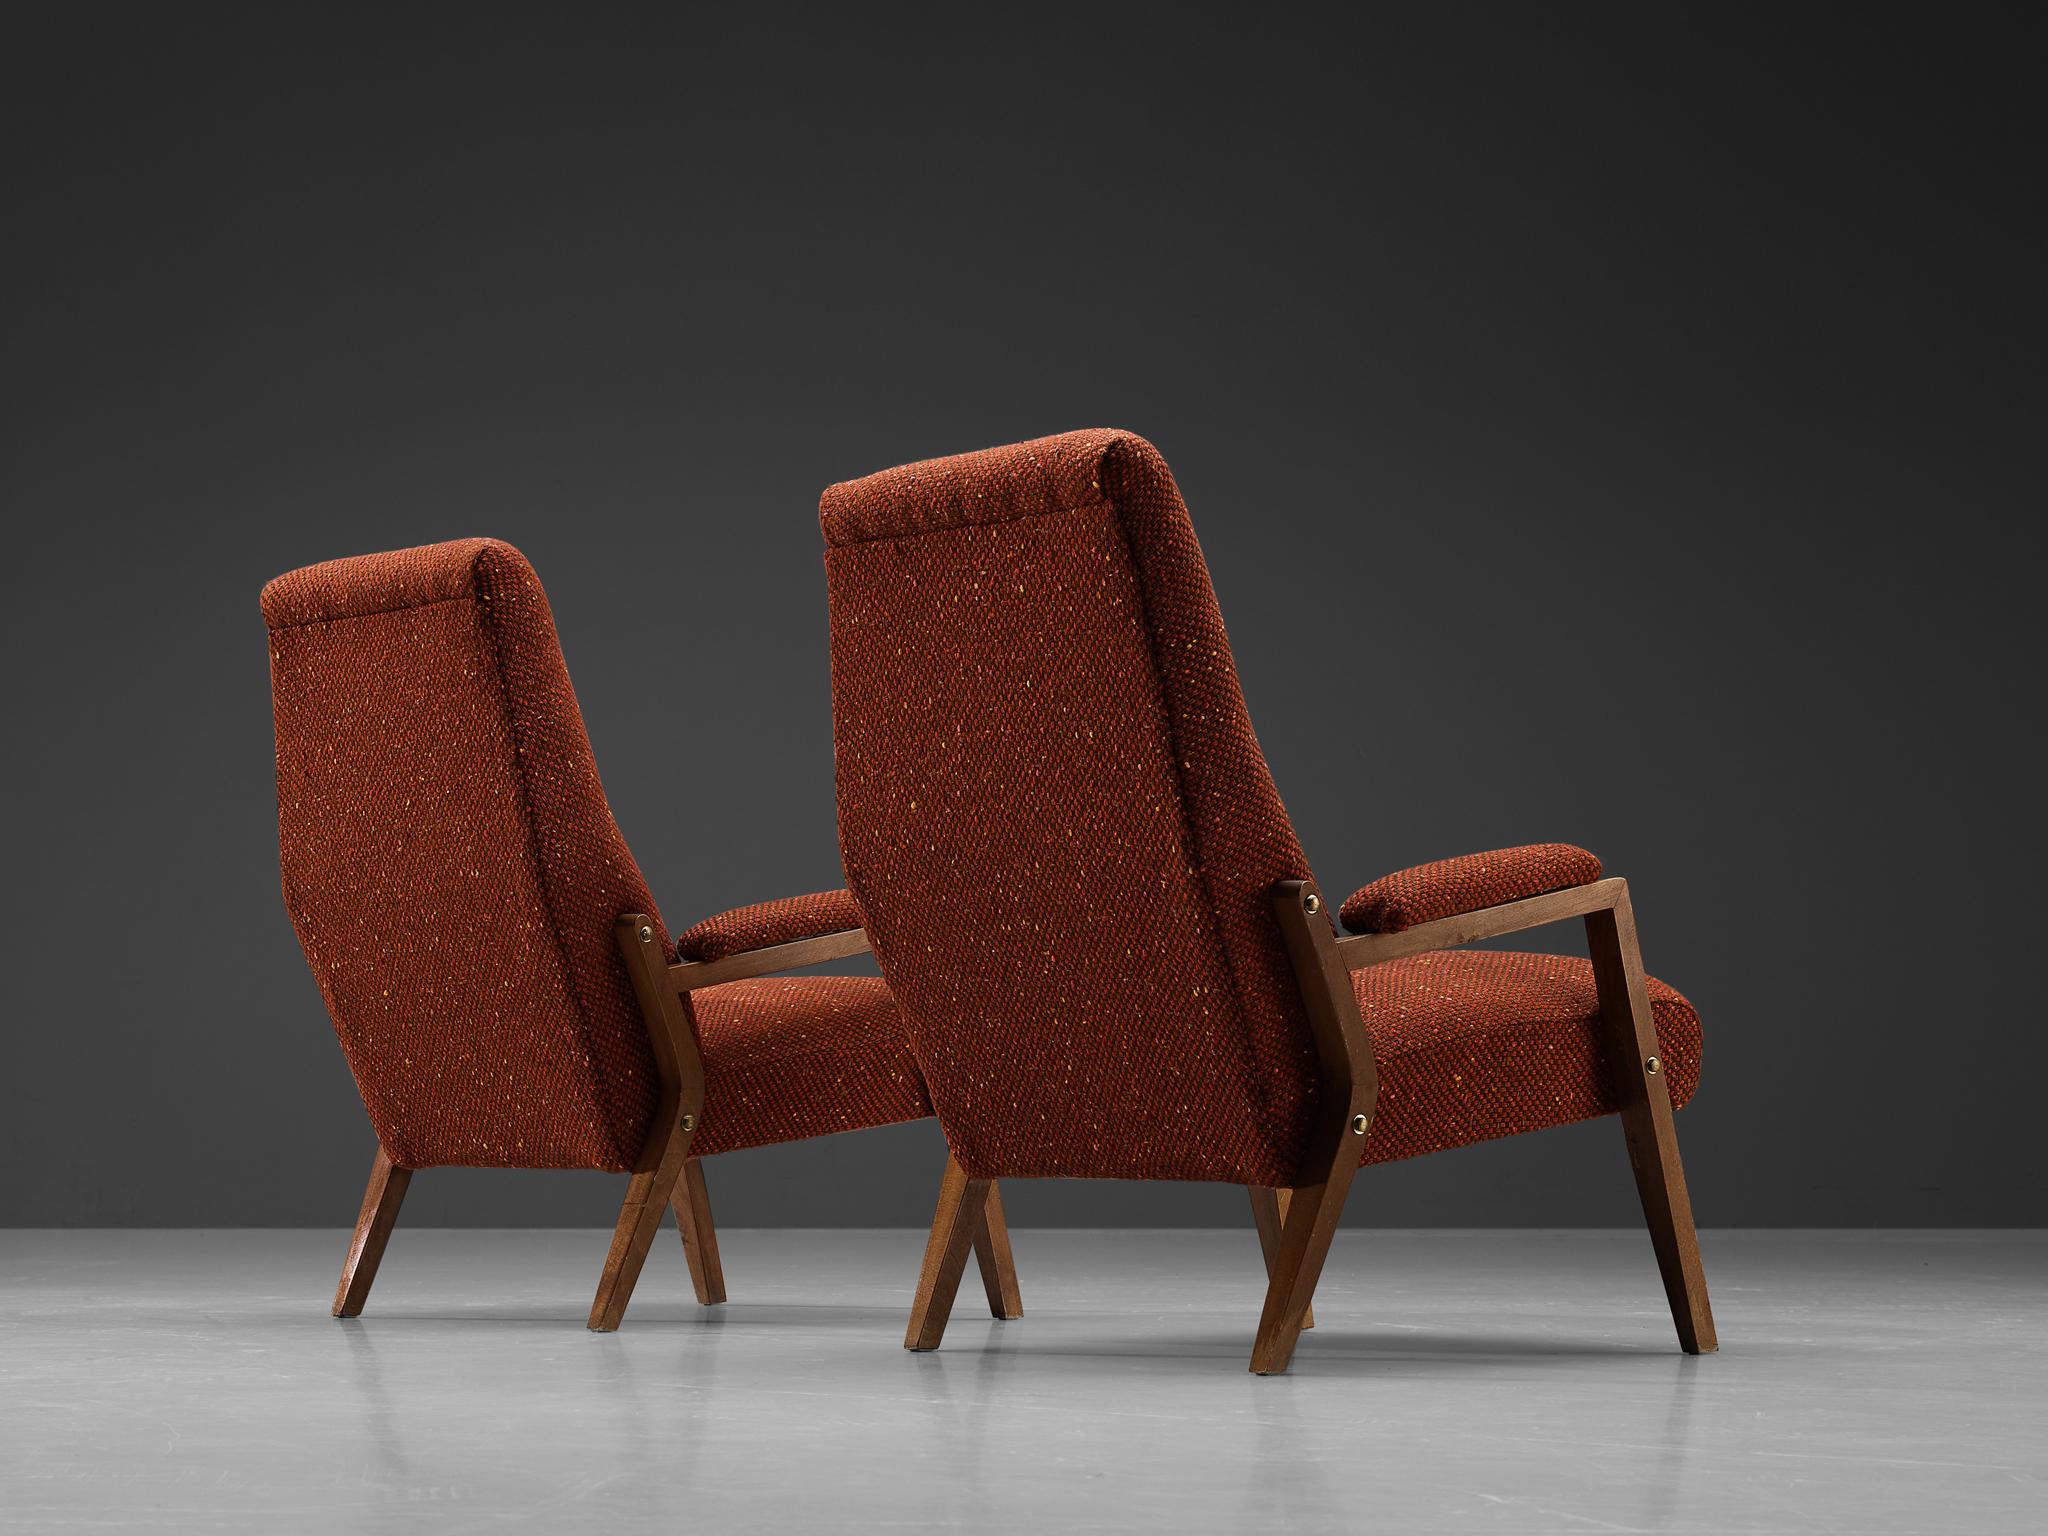 Mid-20th Century Italian Pair of Lounge Chairs in Patterned Brown Red Upholstery For Sale